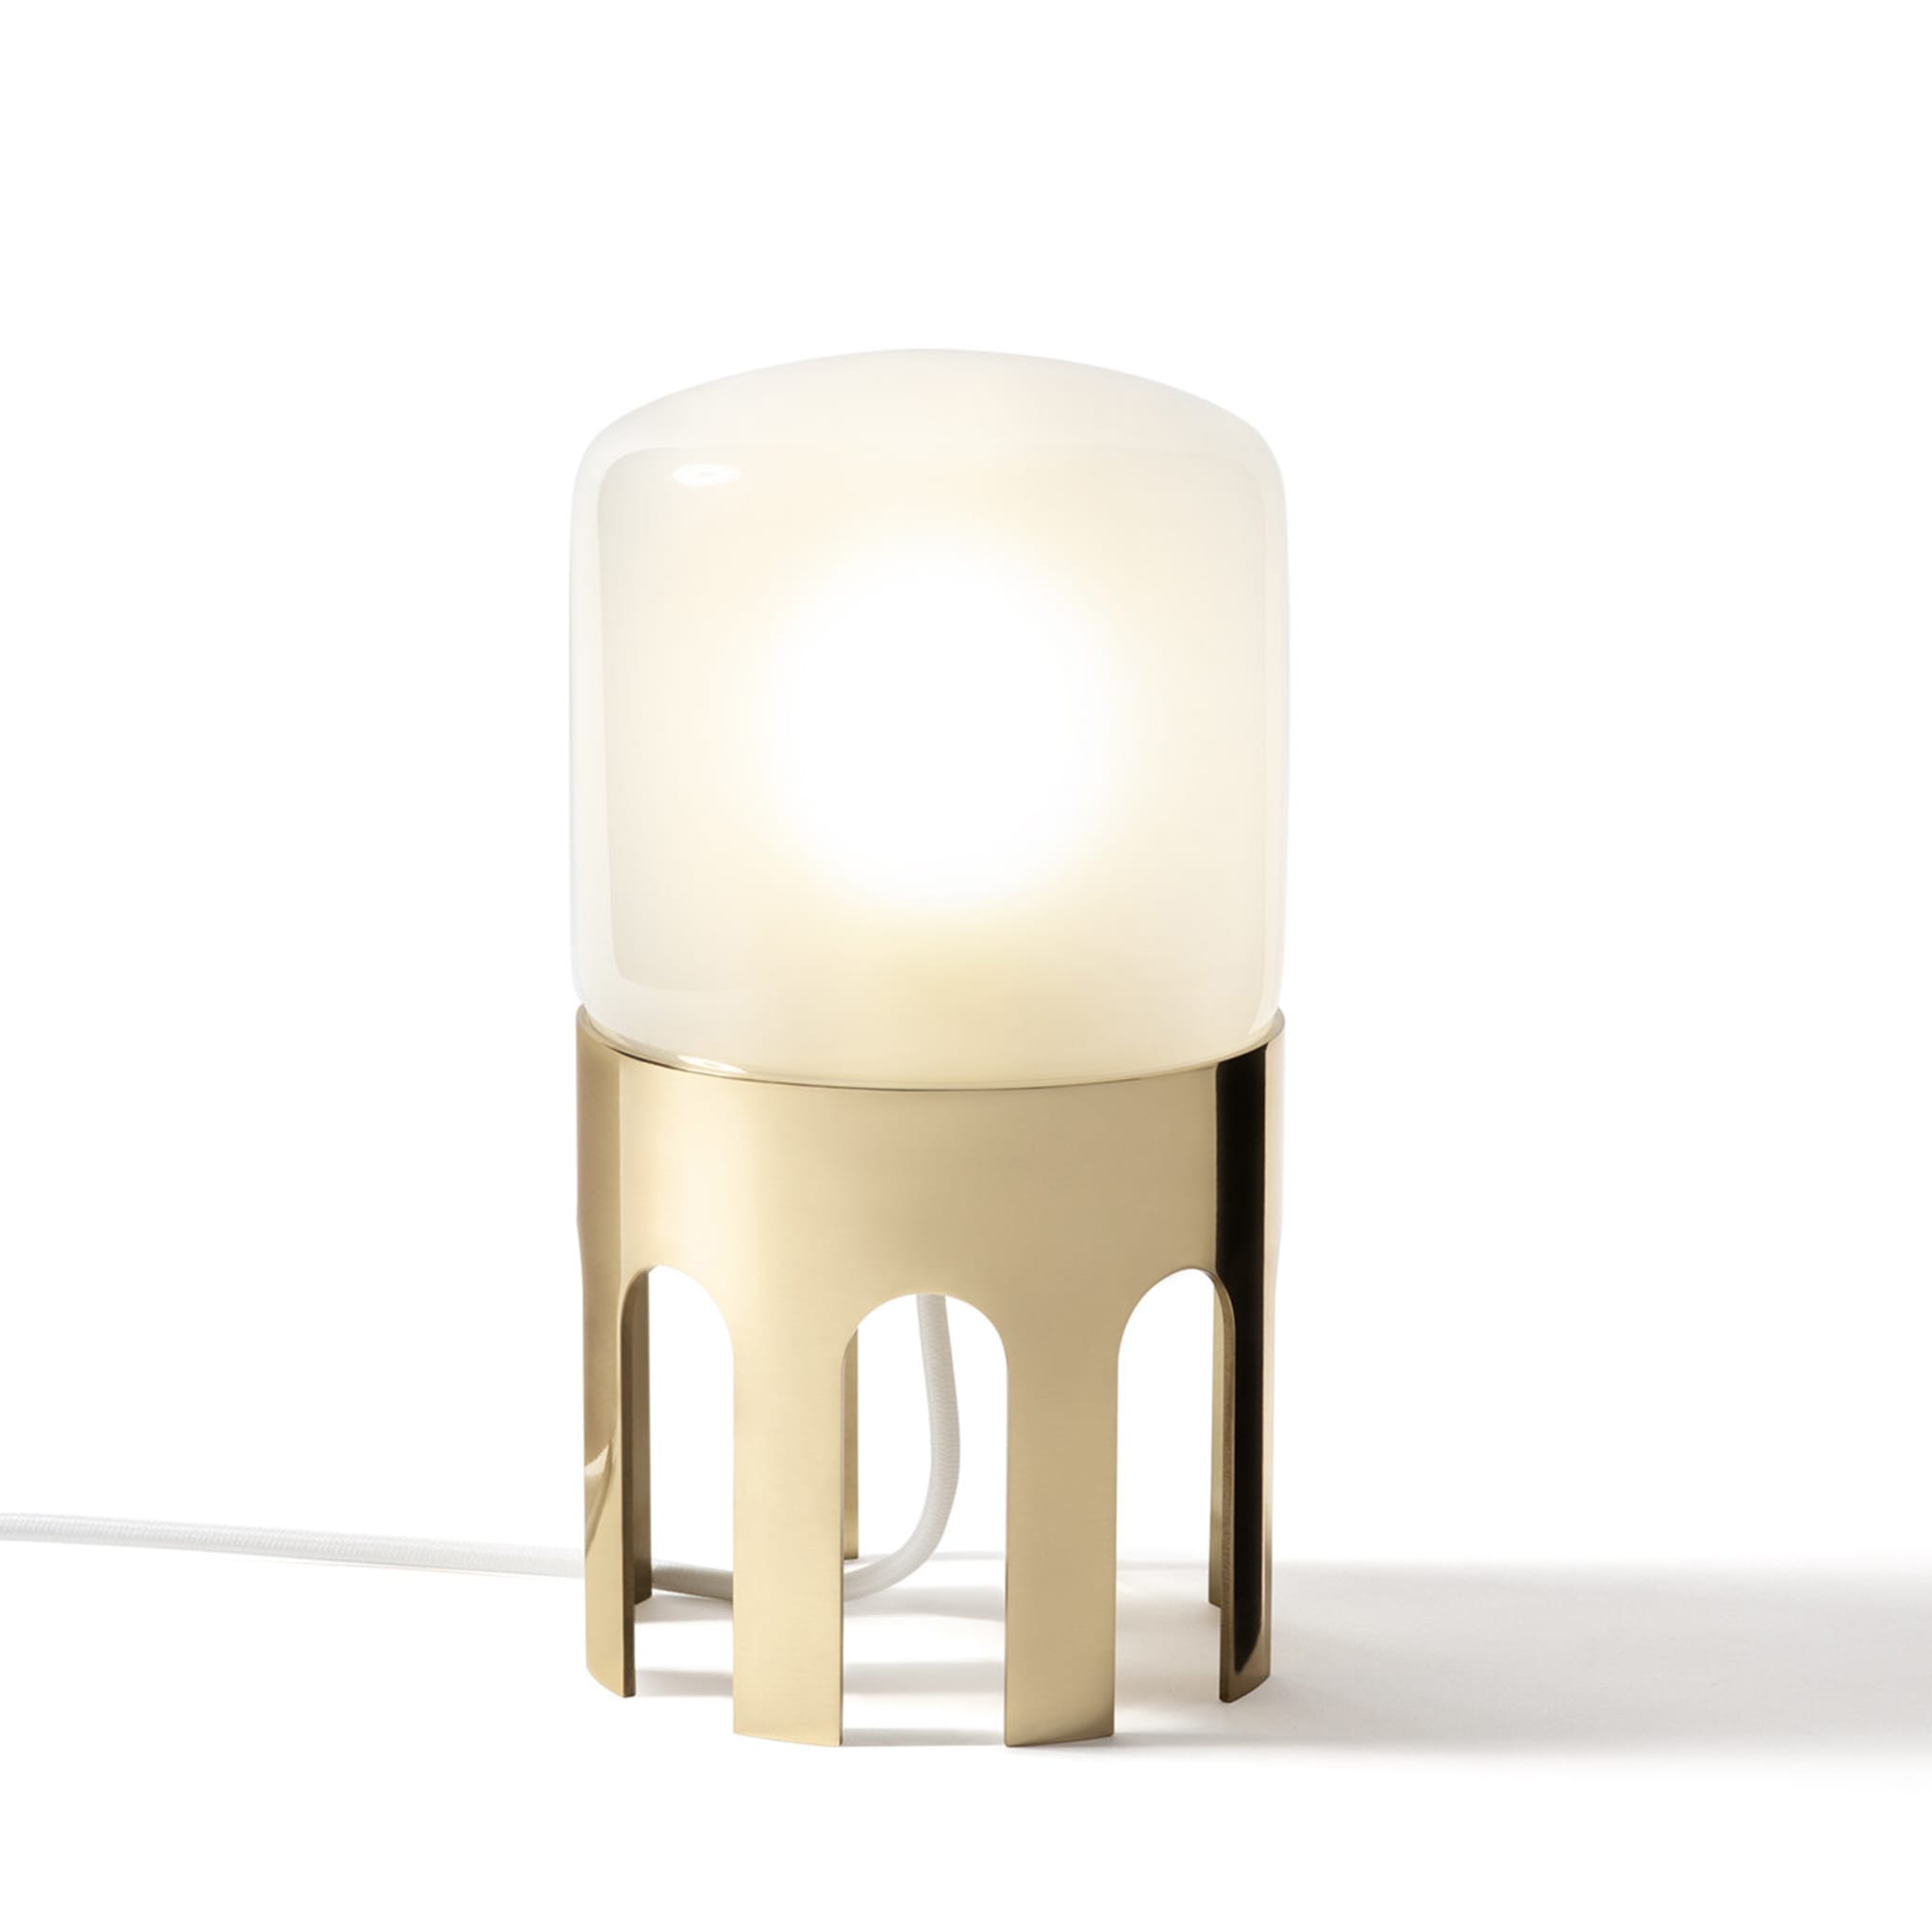 TPLG1 Polished Brass Table Lamp by GoodMorning studio - Alternative view 1